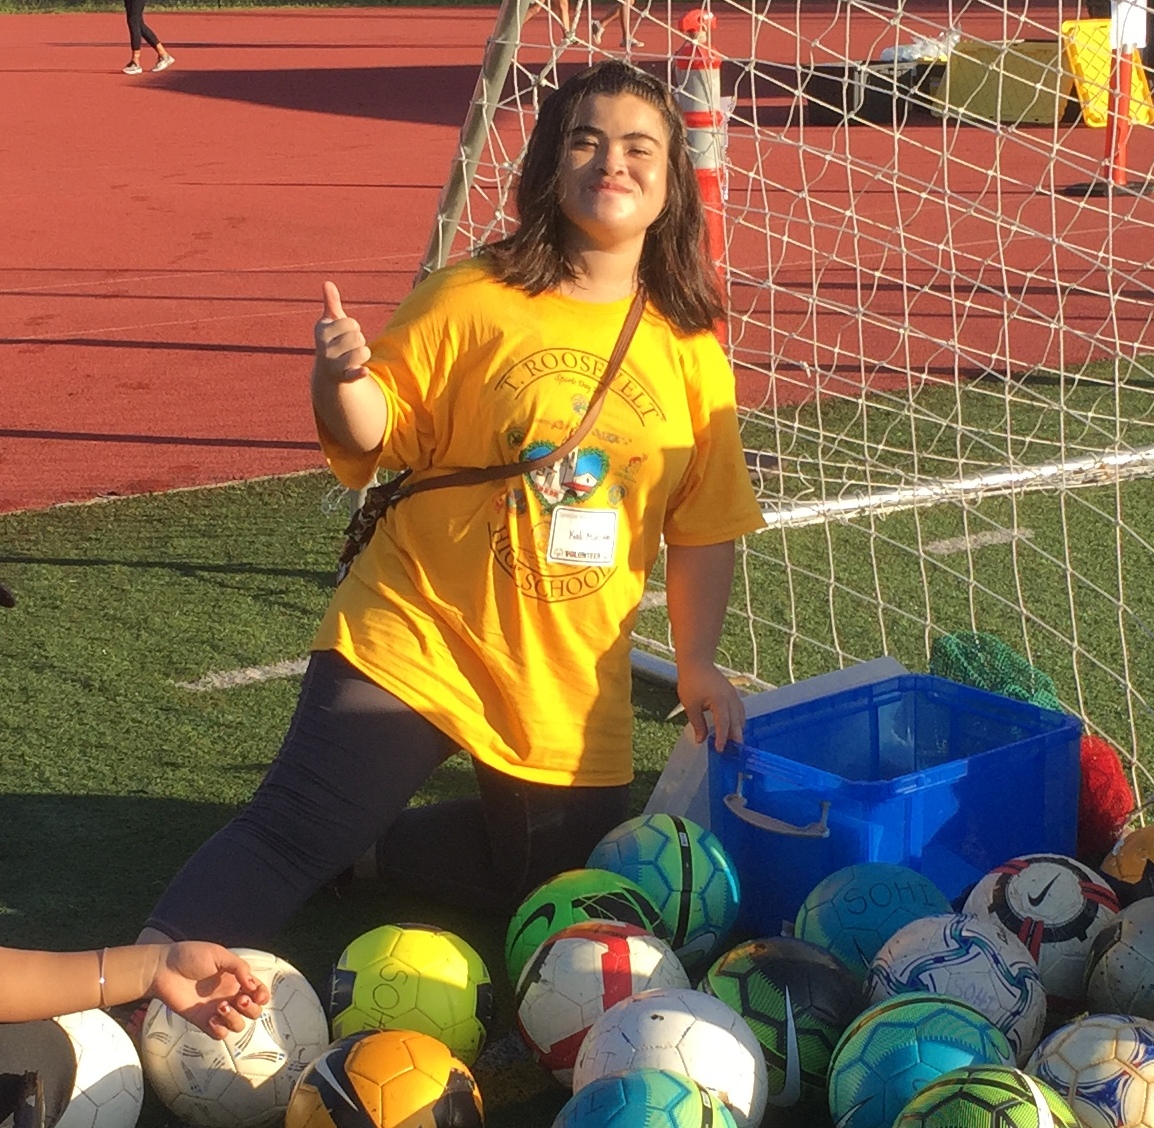 Special Olympics Hawaii athlete, Kaili, show her confidence as she volunteers at a Special Olympics event for preschoolers hosted by her high school.